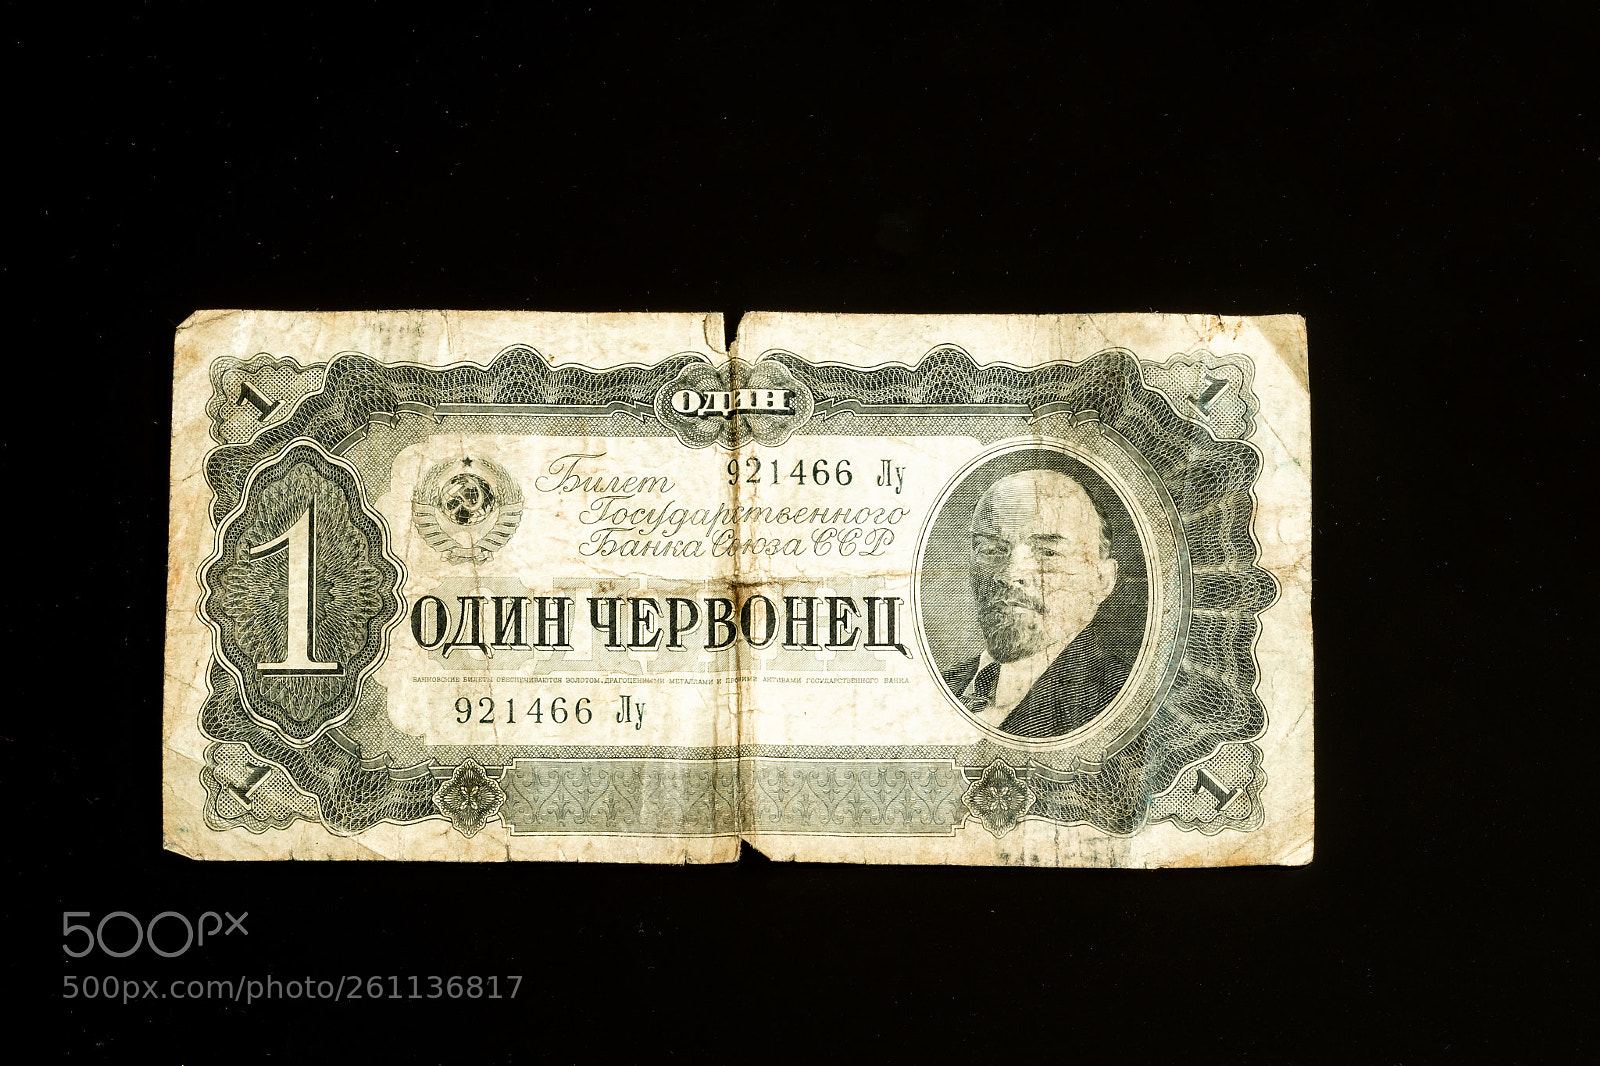 Nikon D850 sample photo. One ruble note with photography